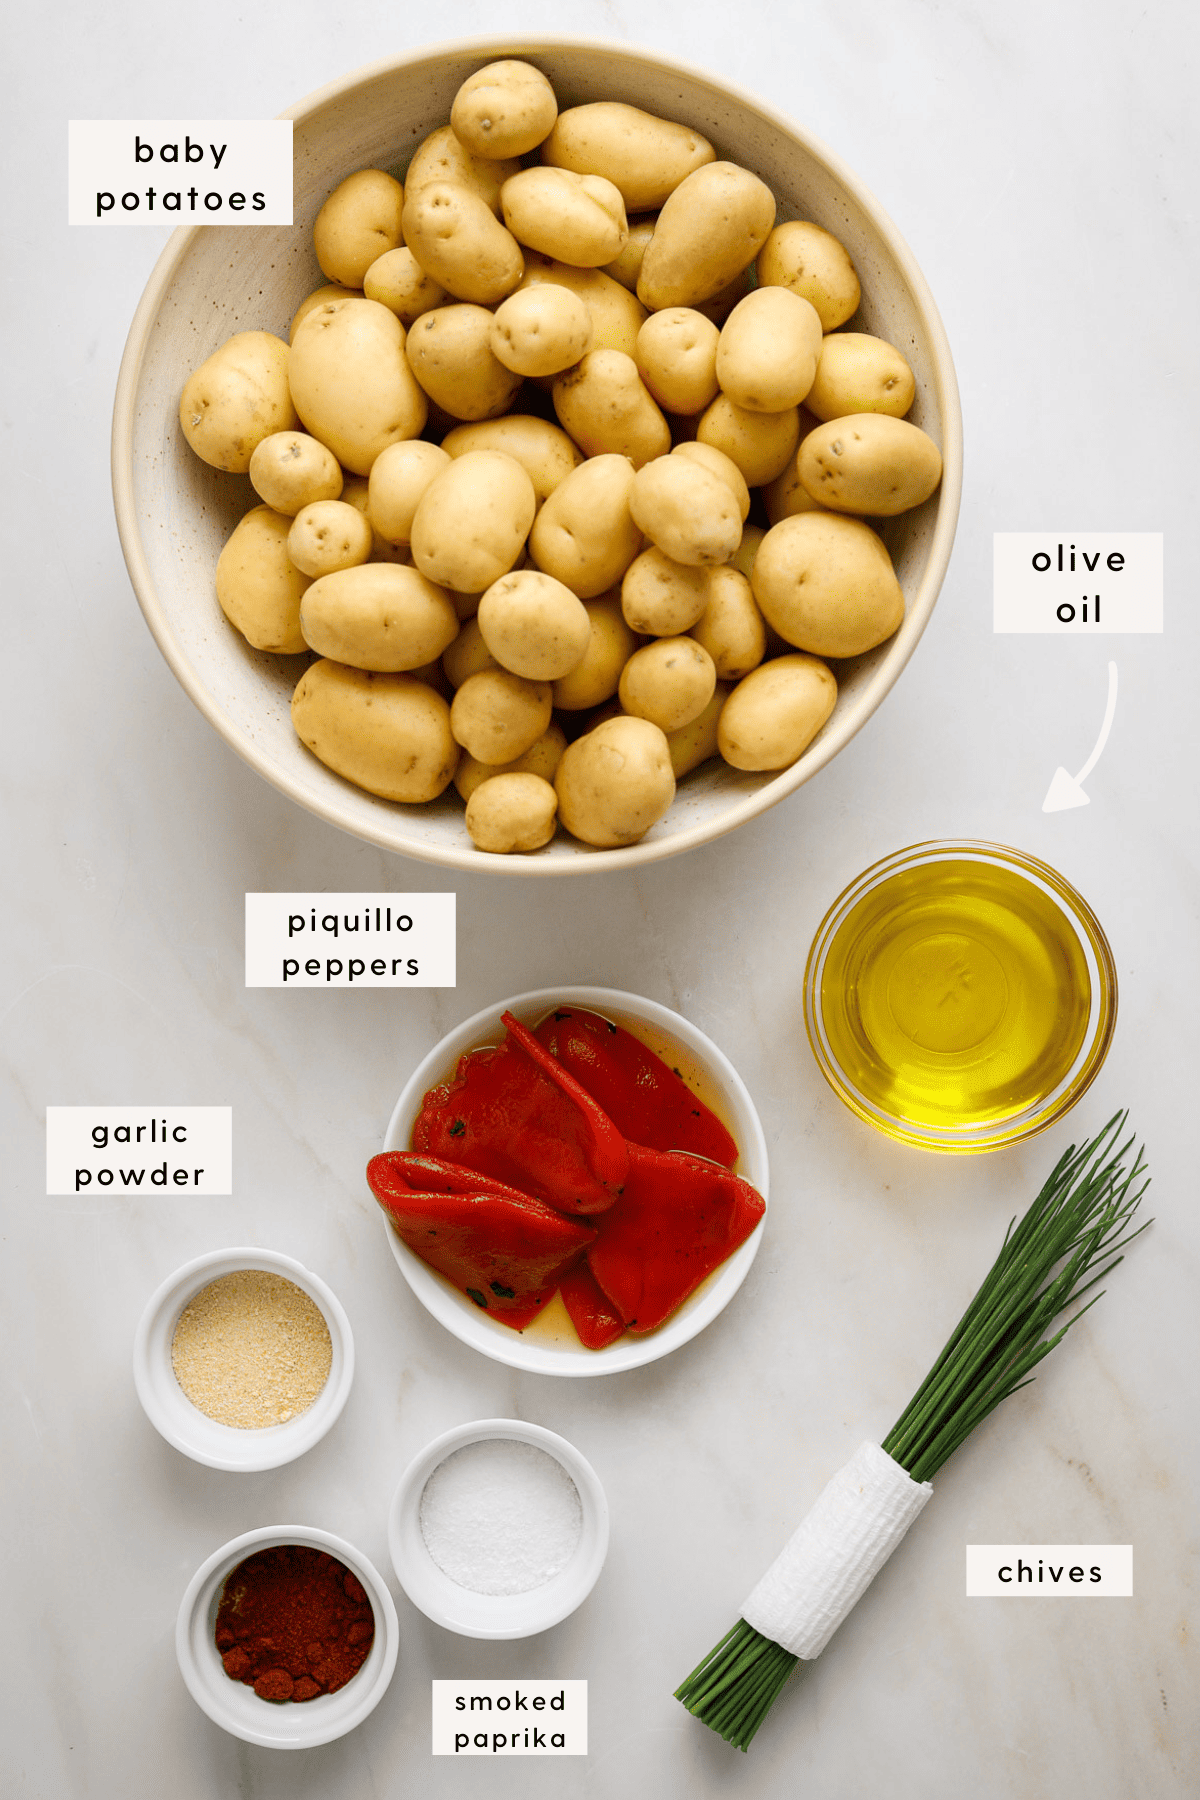 Recipes ingredients portioned into small bowls; olive oil, seasonings, chives, roasted peppers and small gold potatoes.